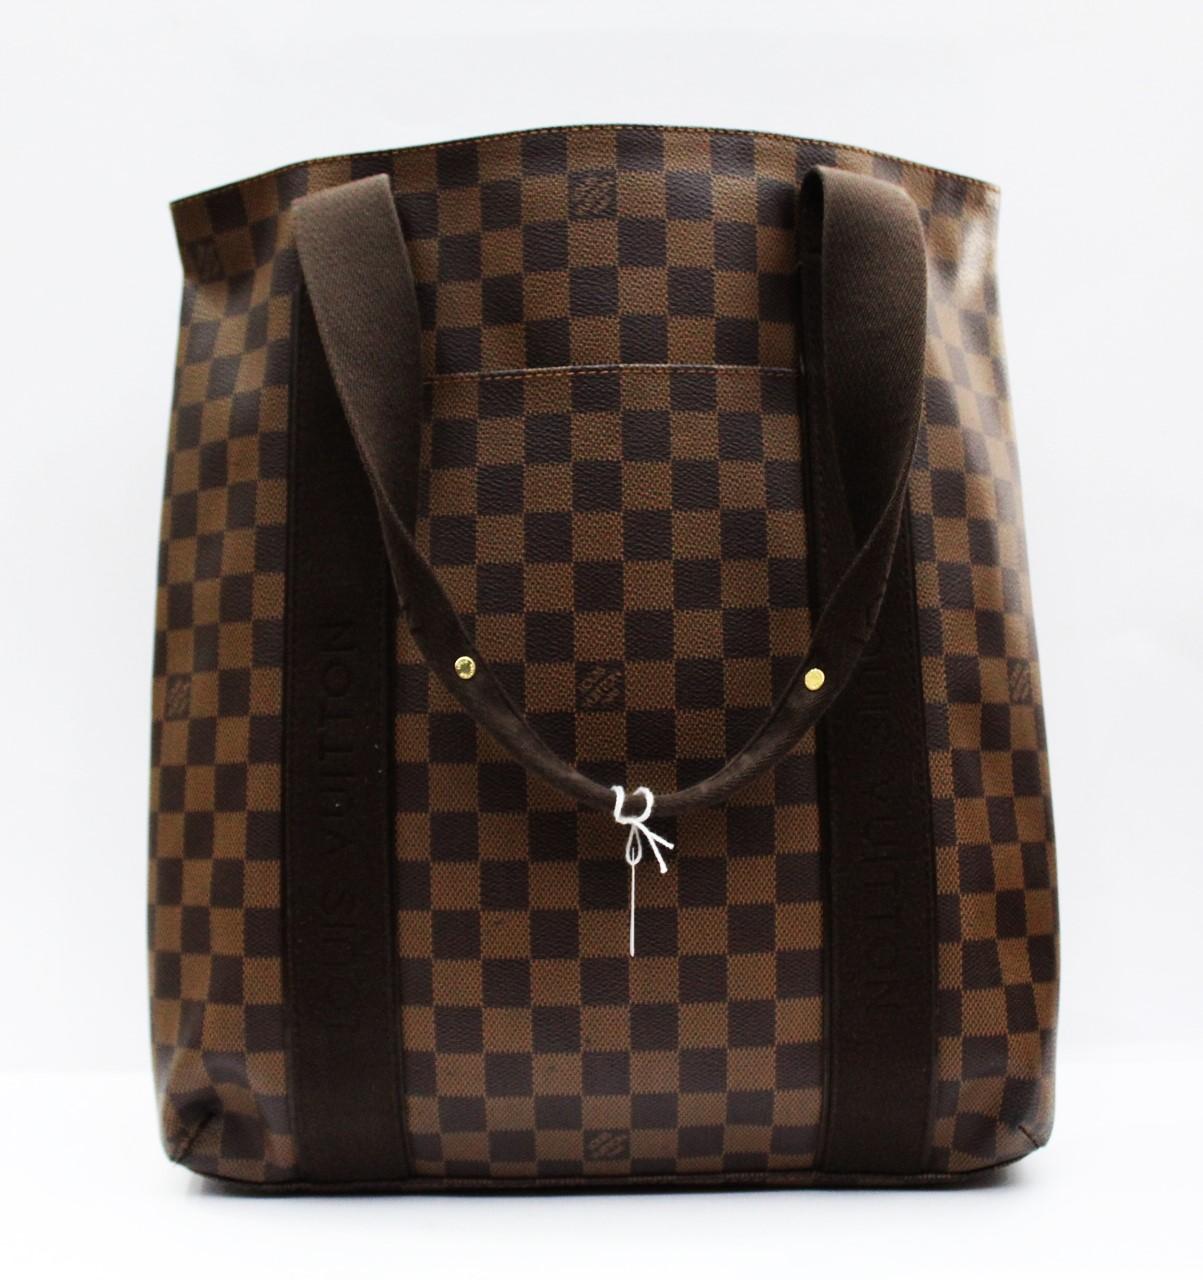 The Louis Vuitton Damier Canvas Beaubourg Tote Bag has fashion and functionality all rolled into one. It features press studs on both sides for expanding the bag to fit a laptop or larger documents. With its roomy capacity, it is perfect for taking